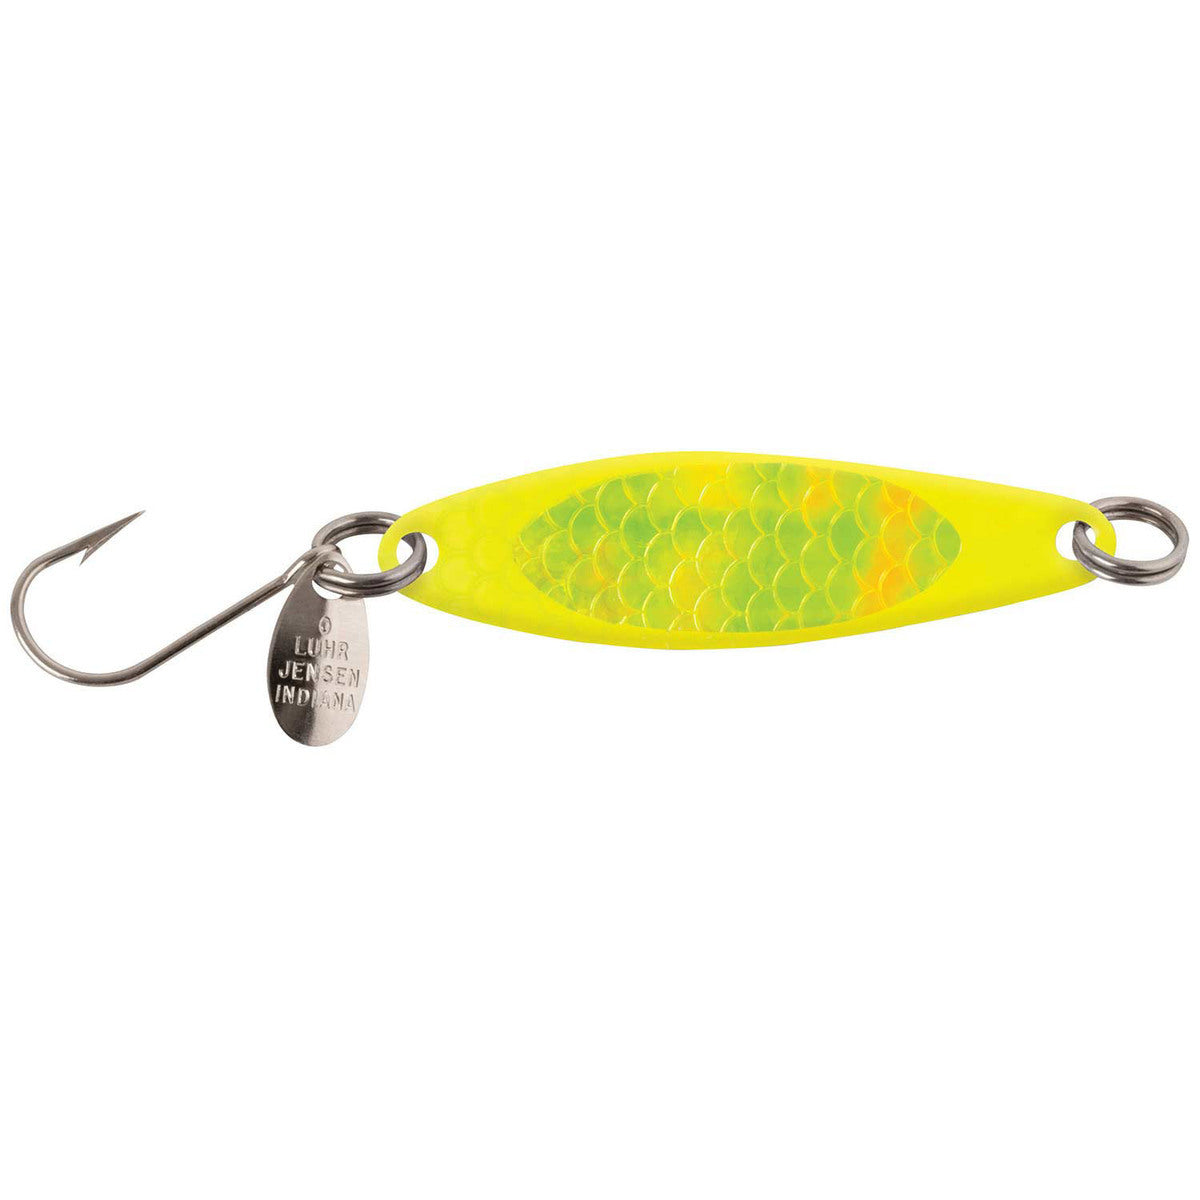 Luhr Jensen Coyote Spoons 4.0 / Chartreuse/Fish Scale